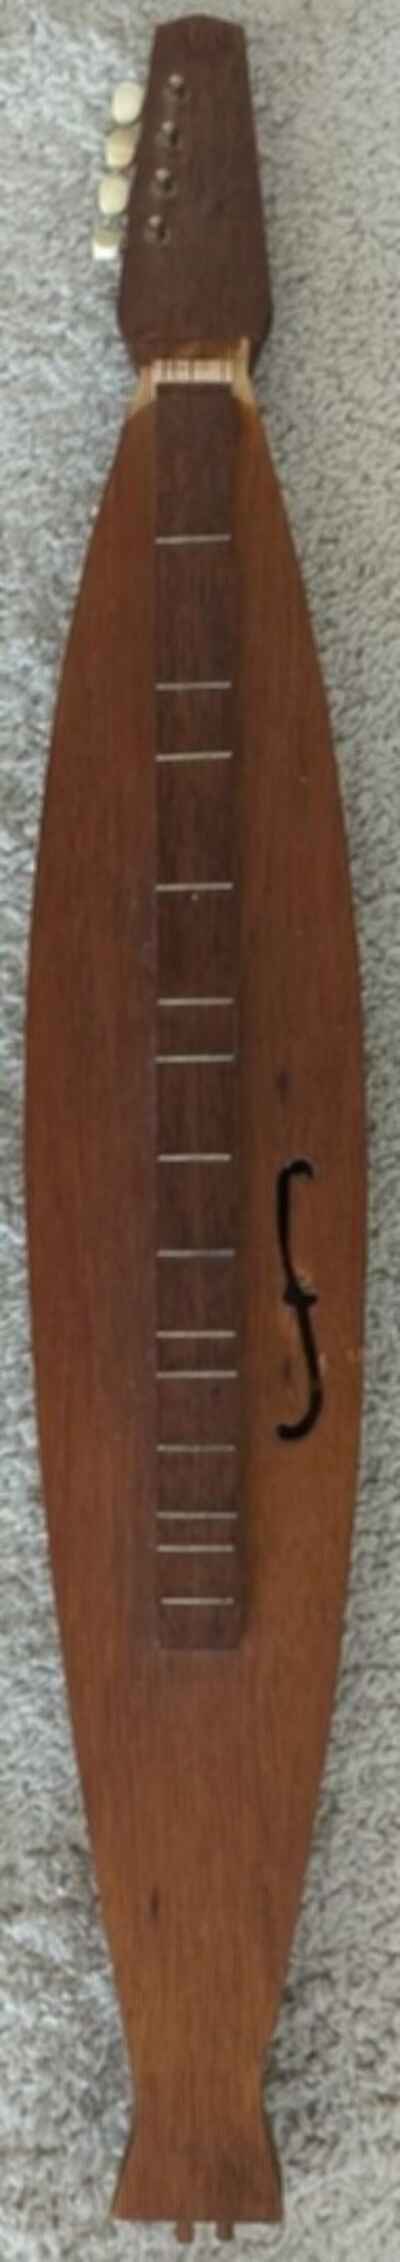 Vintage Lap Dulcimer with Case , extra strings, & more - USA